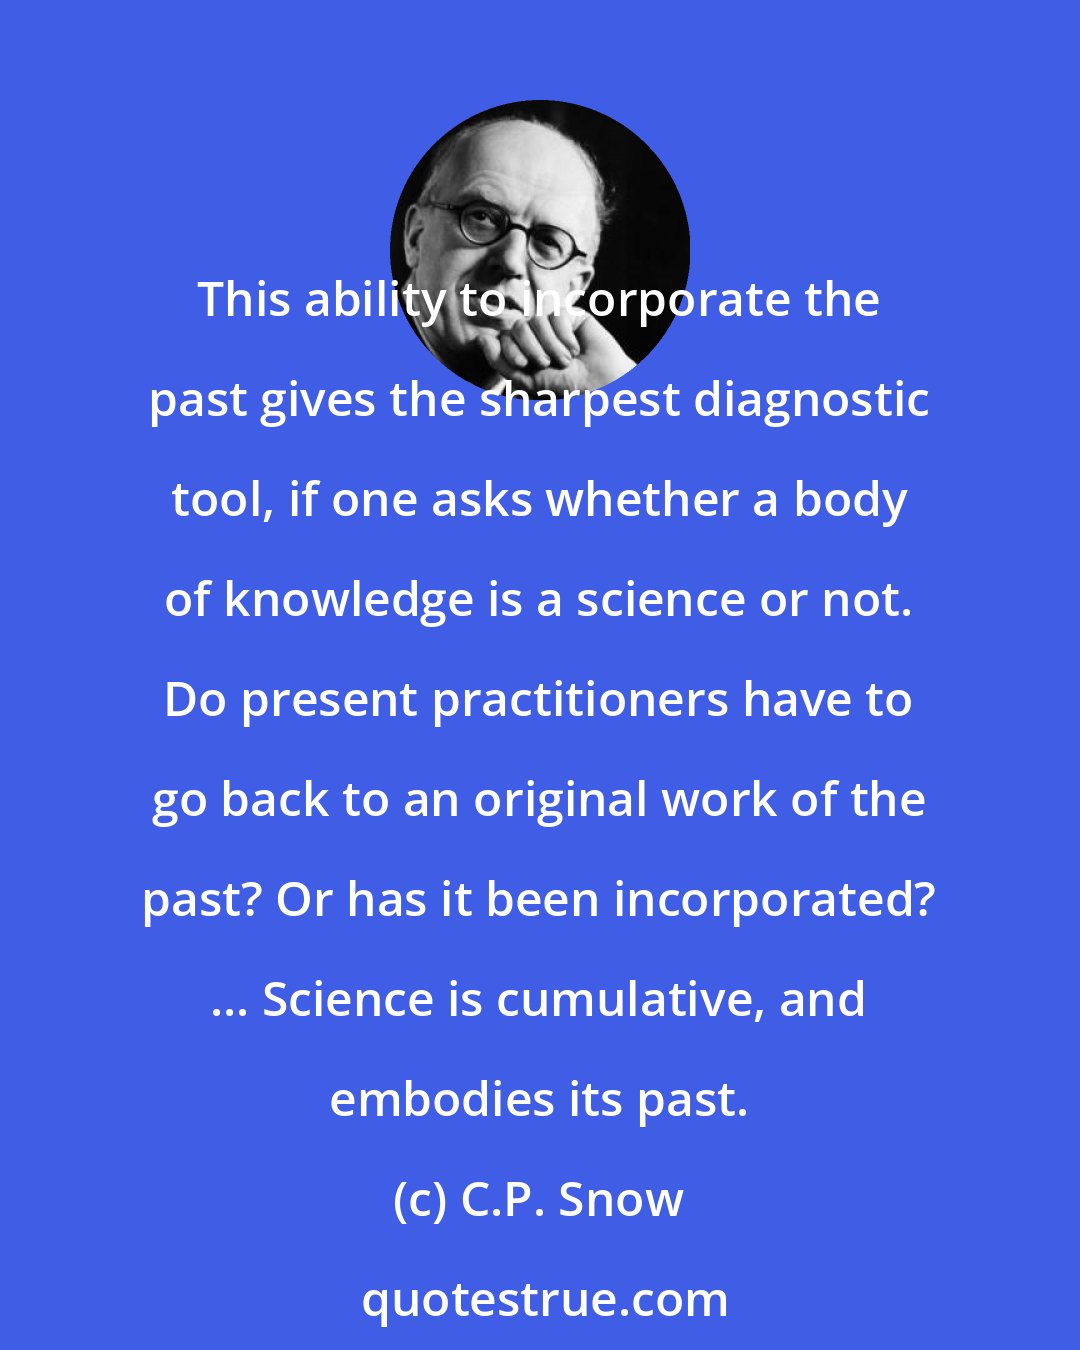 C.P. Snow: This ability to incorporate the past gives the sharpest diagnostic tool, if one asks whether a body of knowledge is a science or not. Do present practitioners have to go back to an original work of the past? Or has it been incorporated? ... Science is cumulative, and embodies its past.